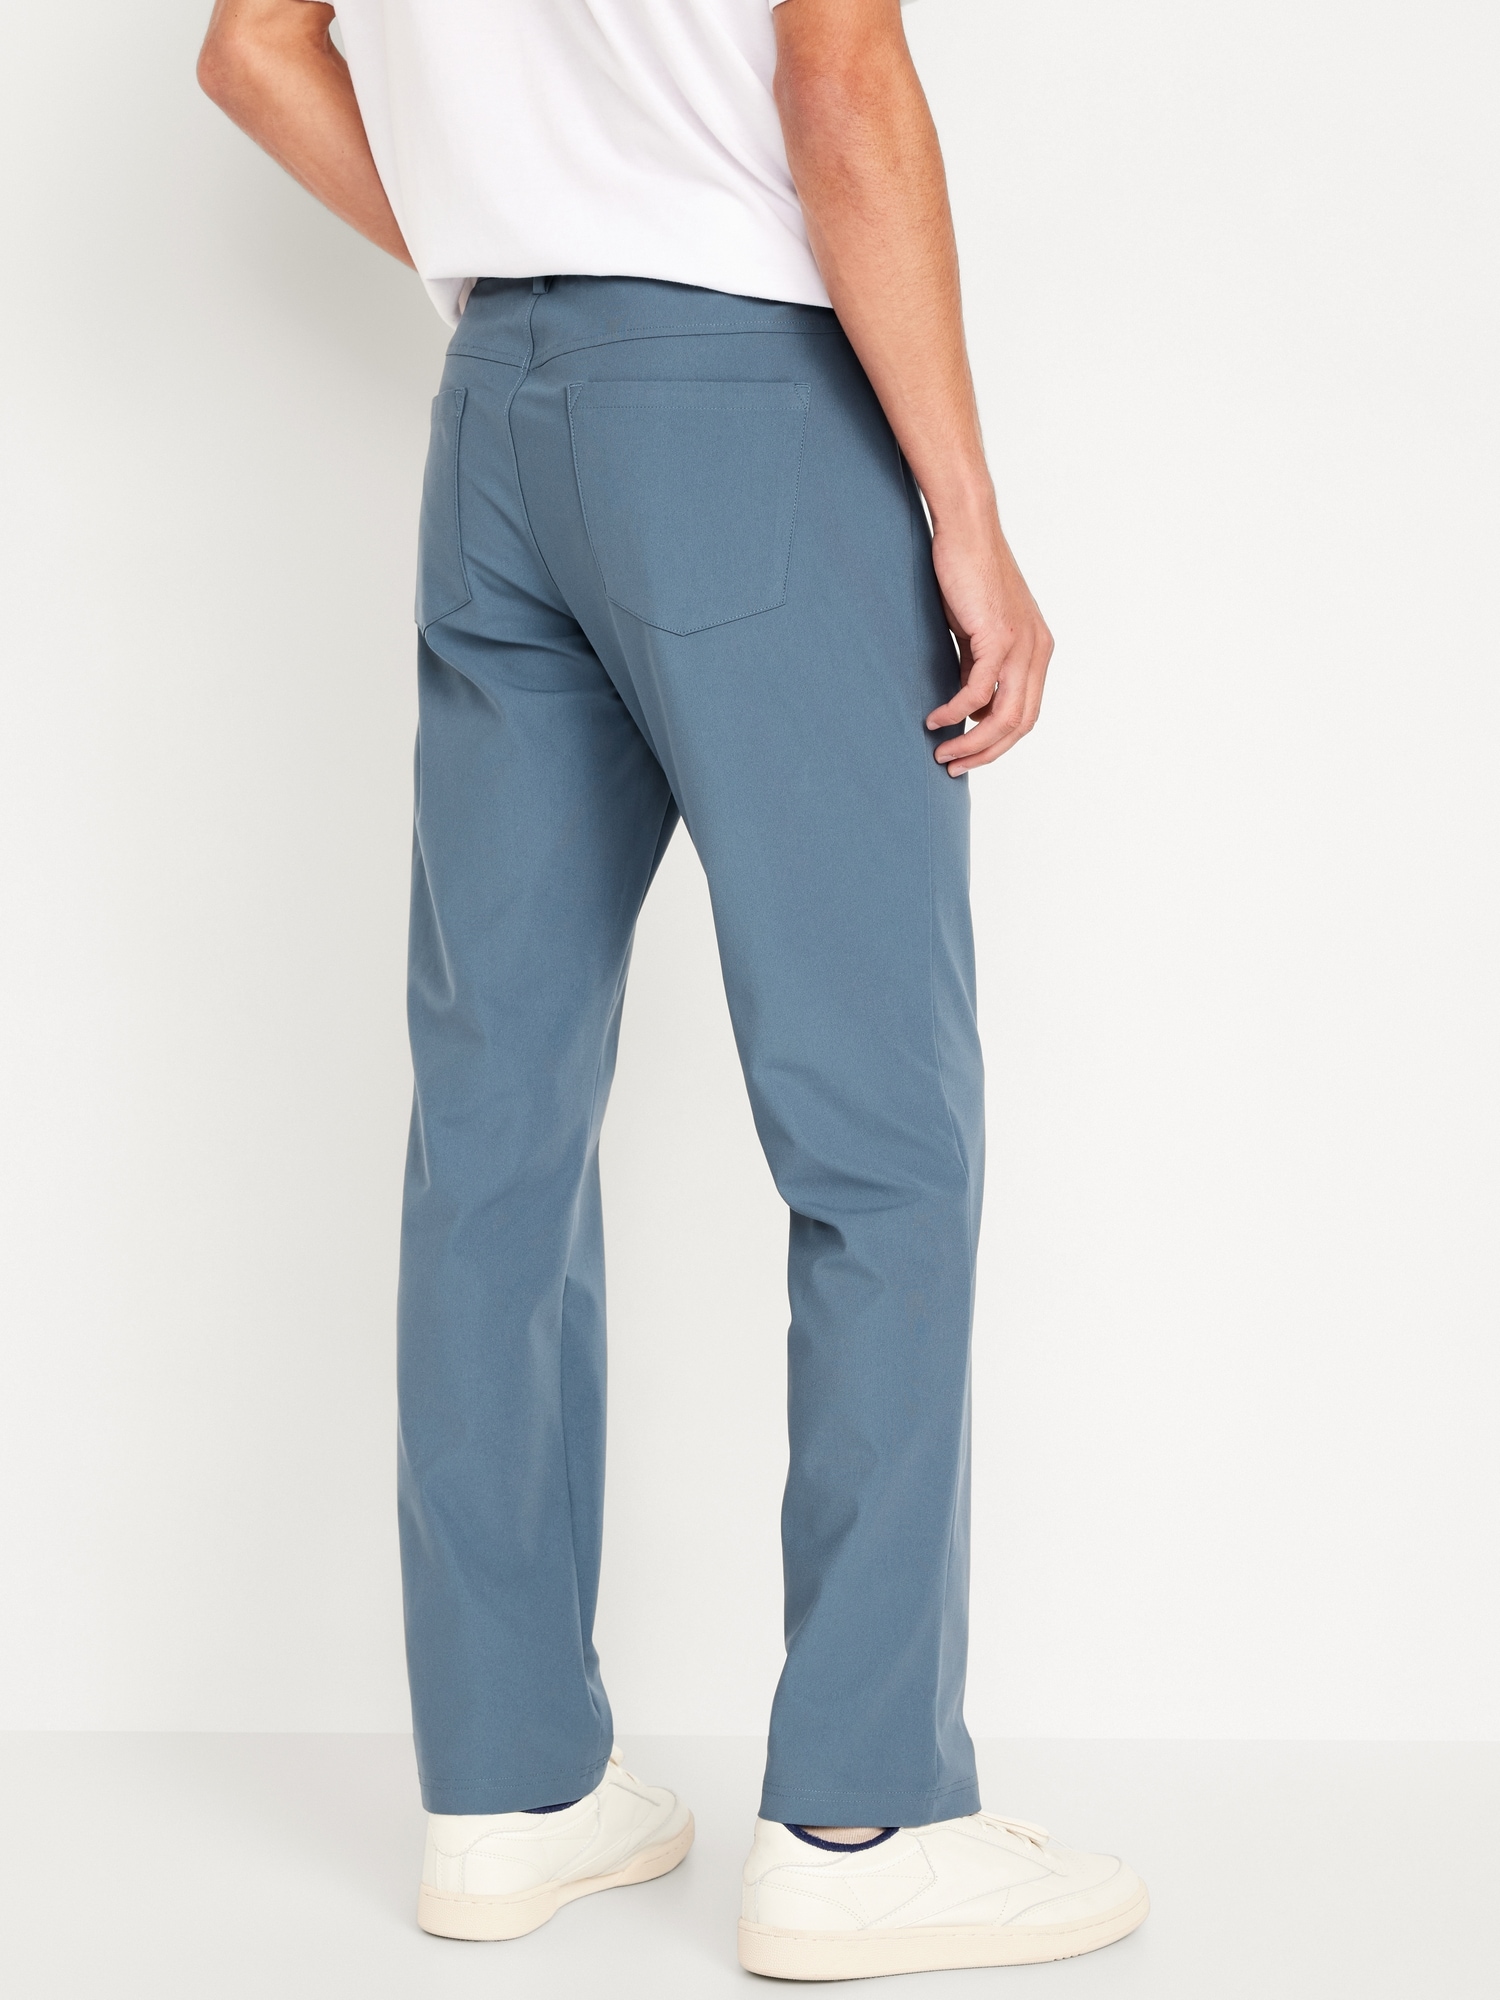 Old Navy - Slim Go-Dry Cool Hybrid Pants Review 